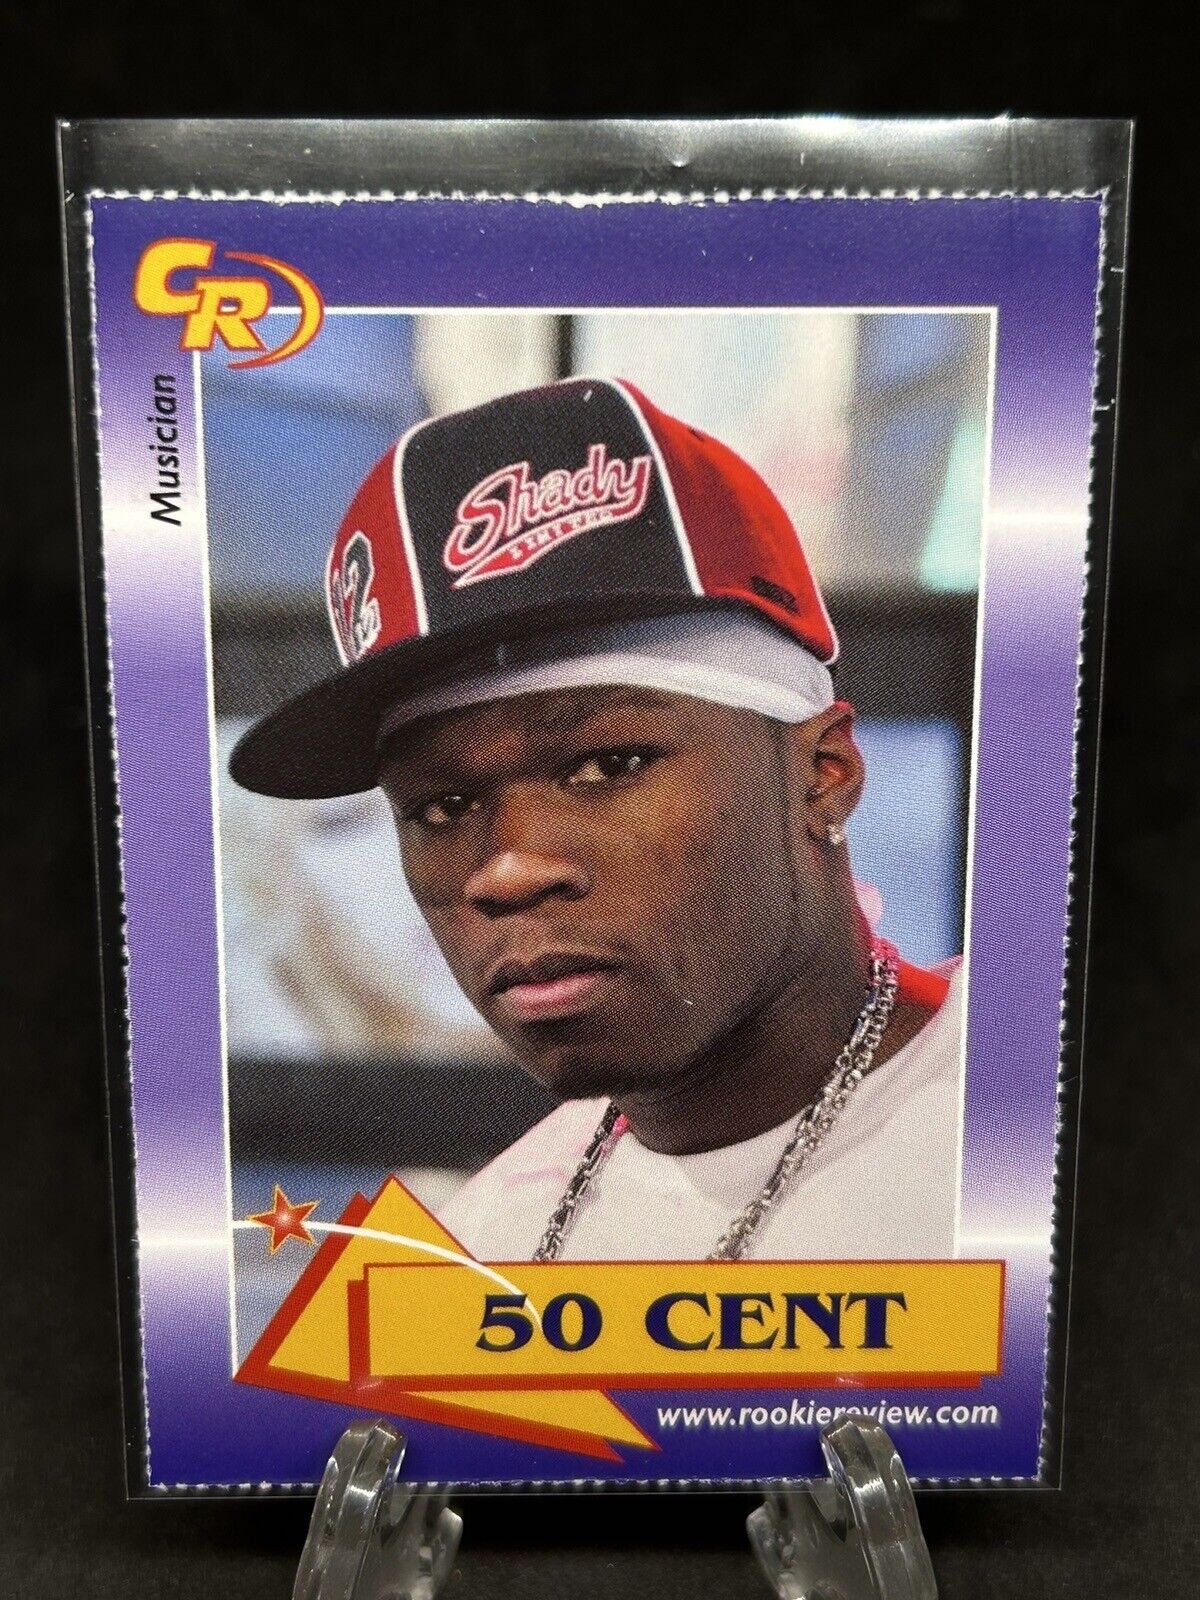 50 CENT - Musician / Rapper 2003 Celebrity Rookie Review Trading Card #10